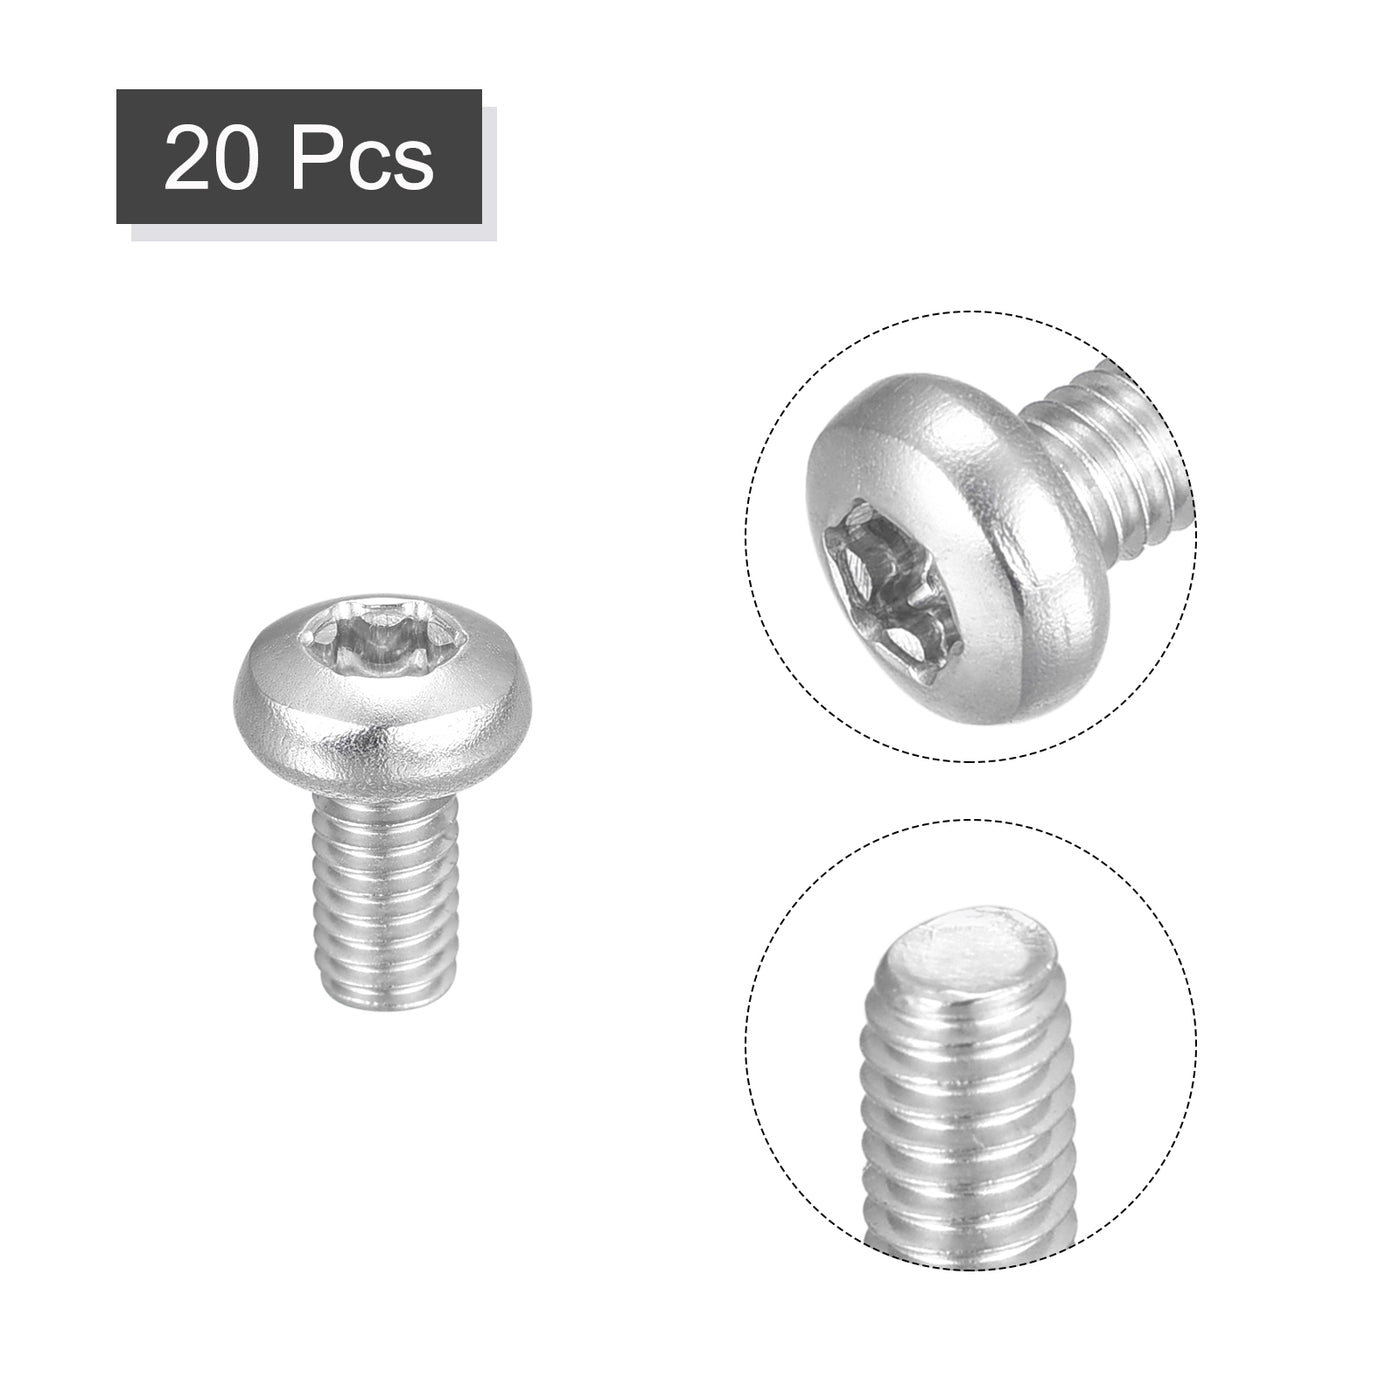 uxcell Uxcell M4x8mm Torx Security Machine Screws, 20pcs 316 Stainless Steel Pan Head Screw